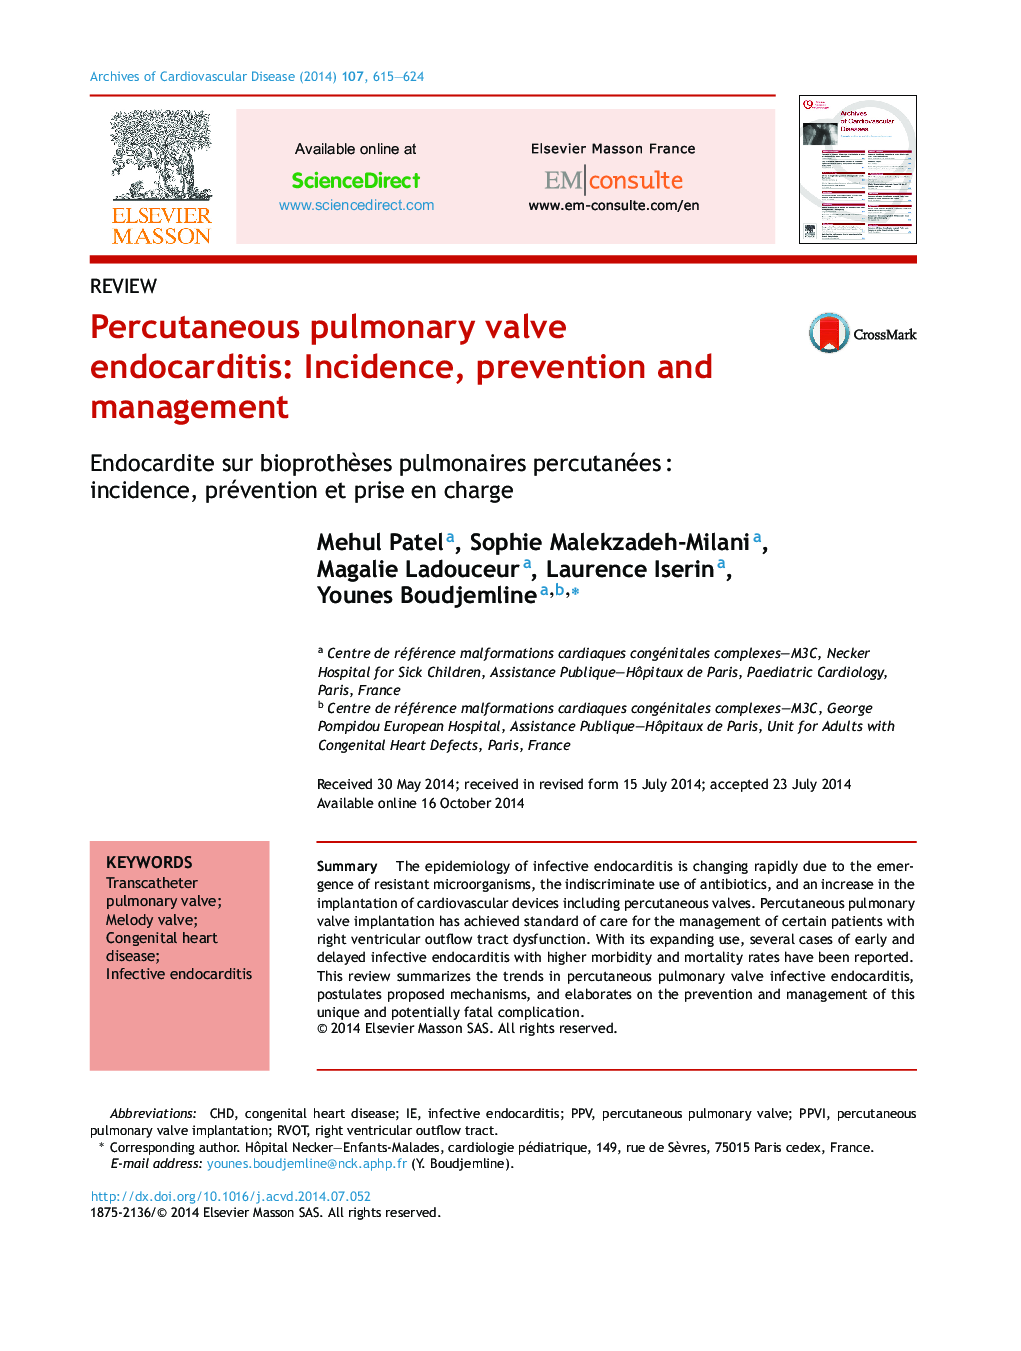 Percutaneous pulmonary valve endocarditis: Incidence, prevention and management